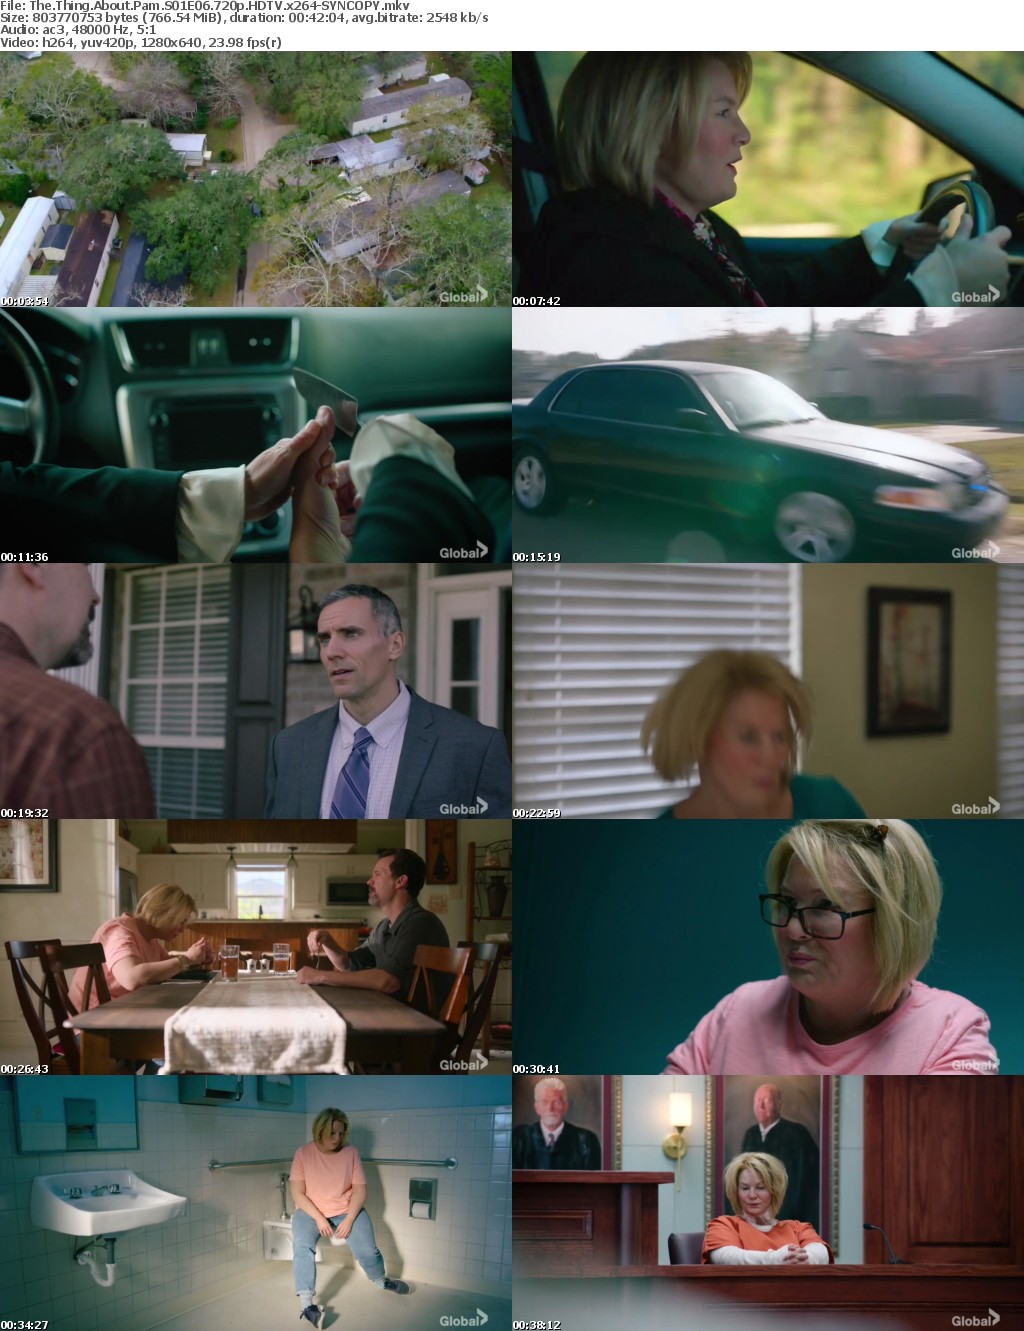 The Thing About Pam S01E06 720p HDTV x264-SYNCOPY